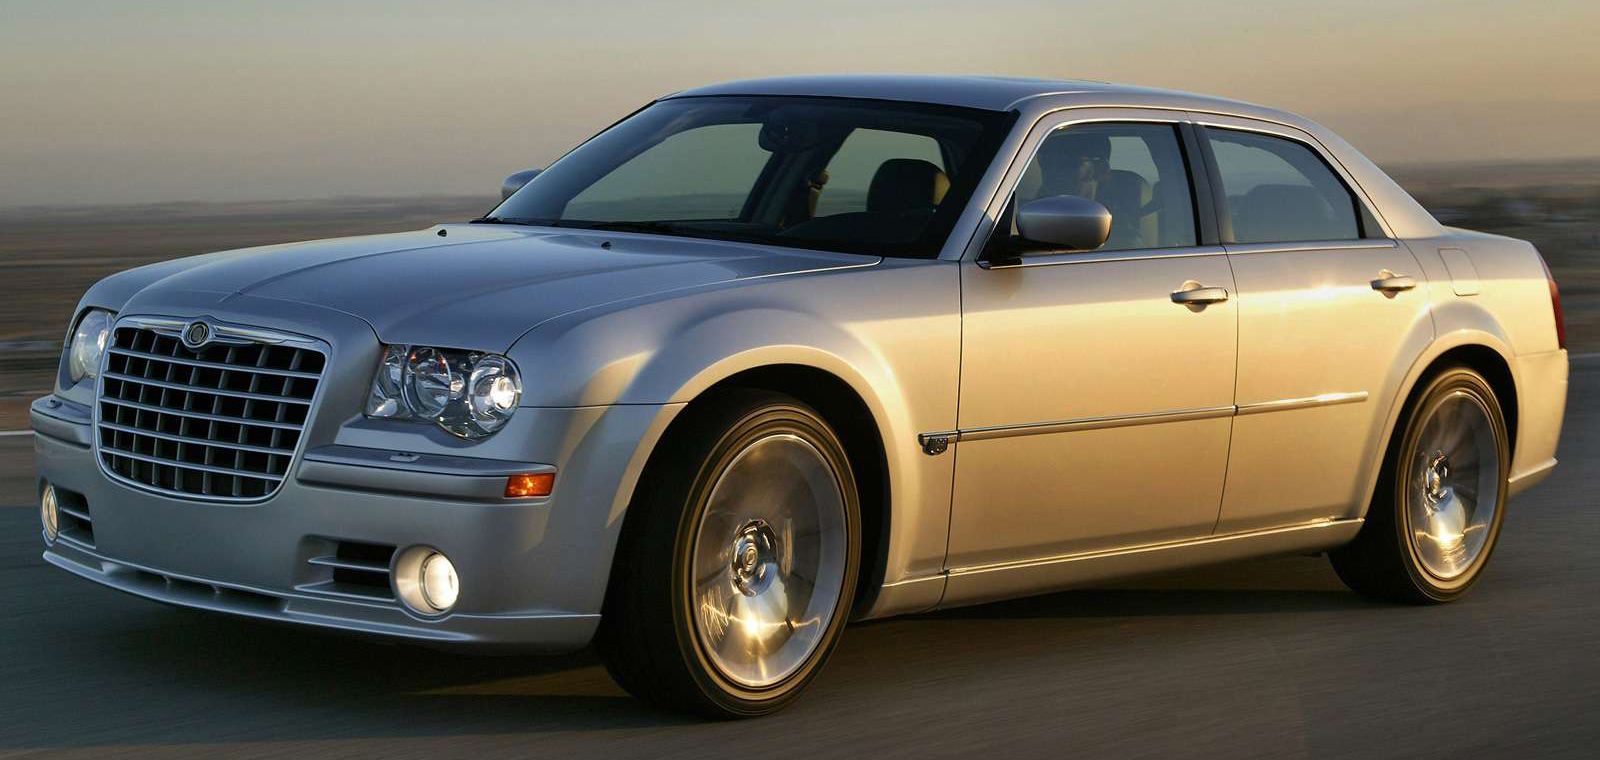 Silver 2005 Chrysler 300C SRT8 being driven in the countryside